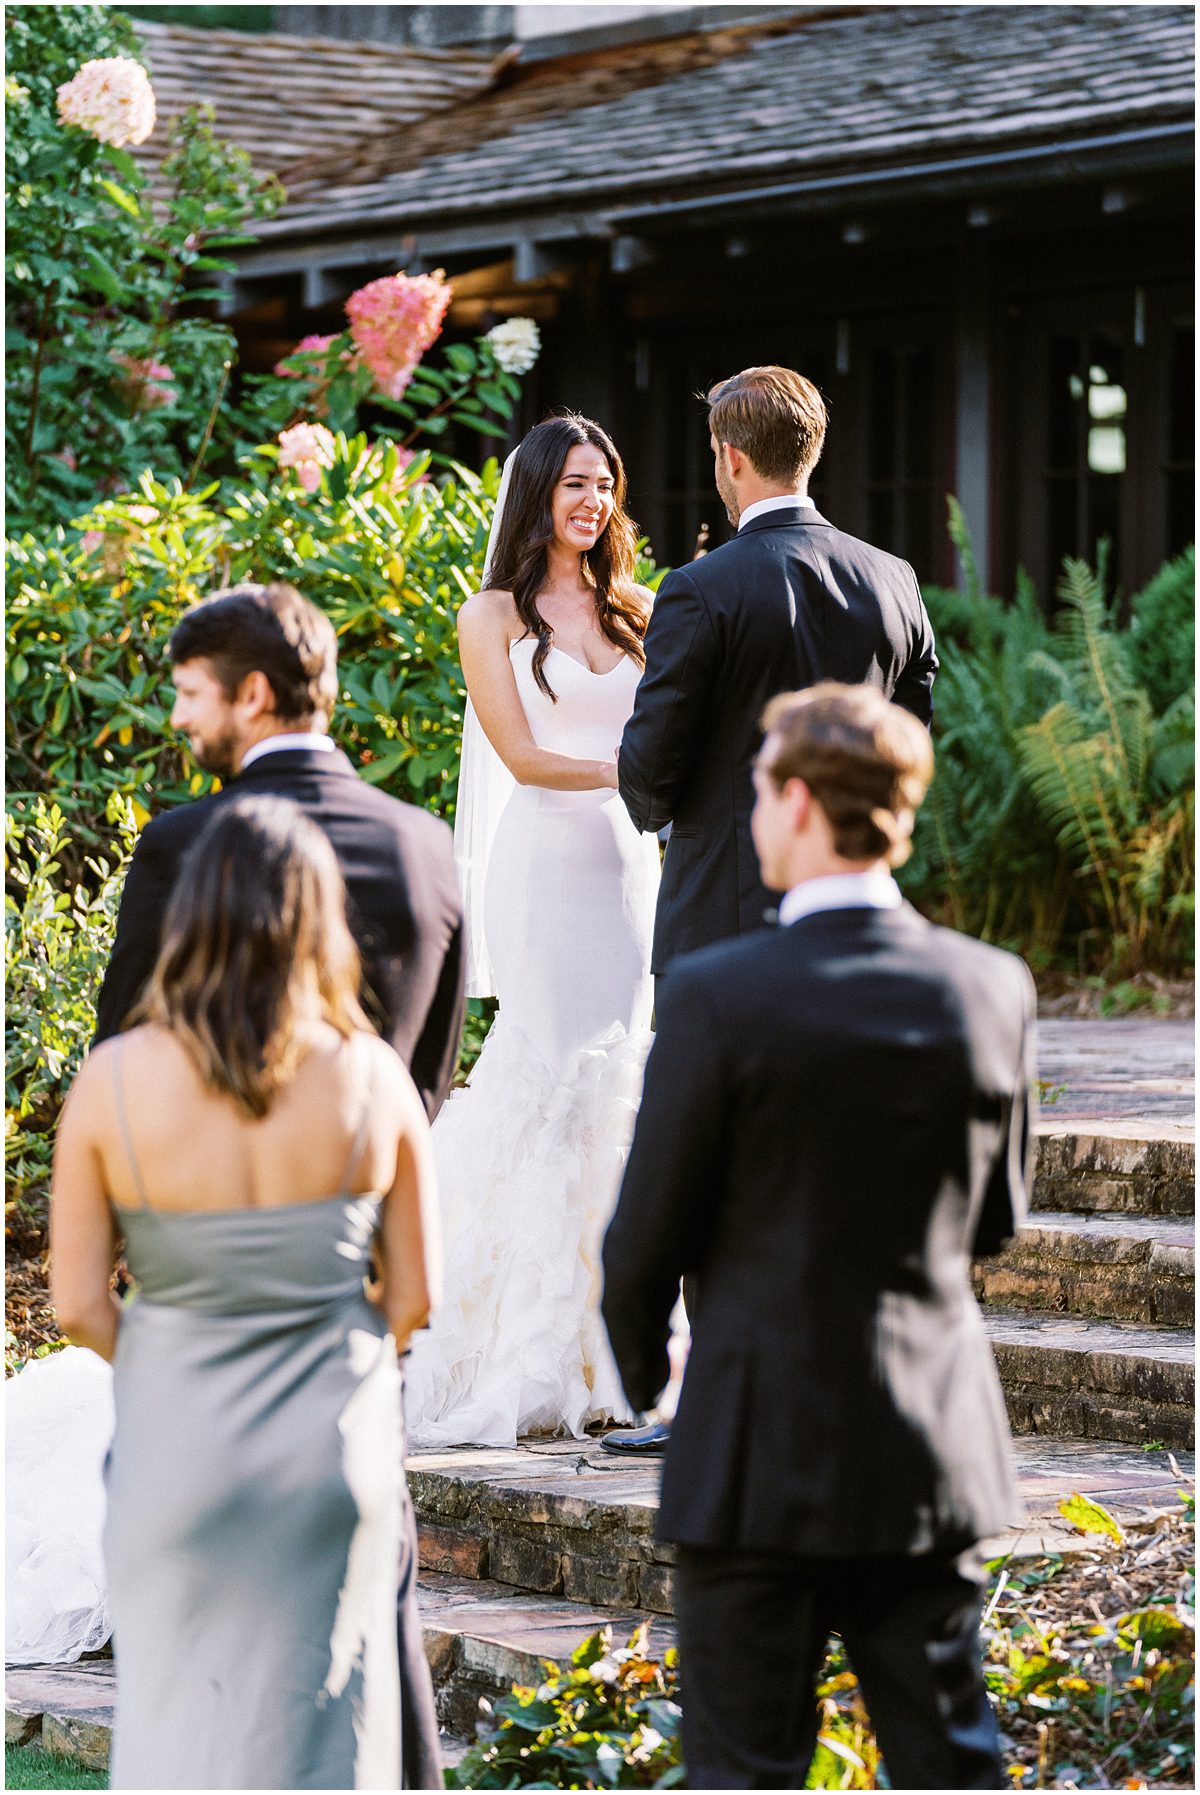 Bride laughing during the vows at Mountaintop Golf and Lake Club wedding ceremony